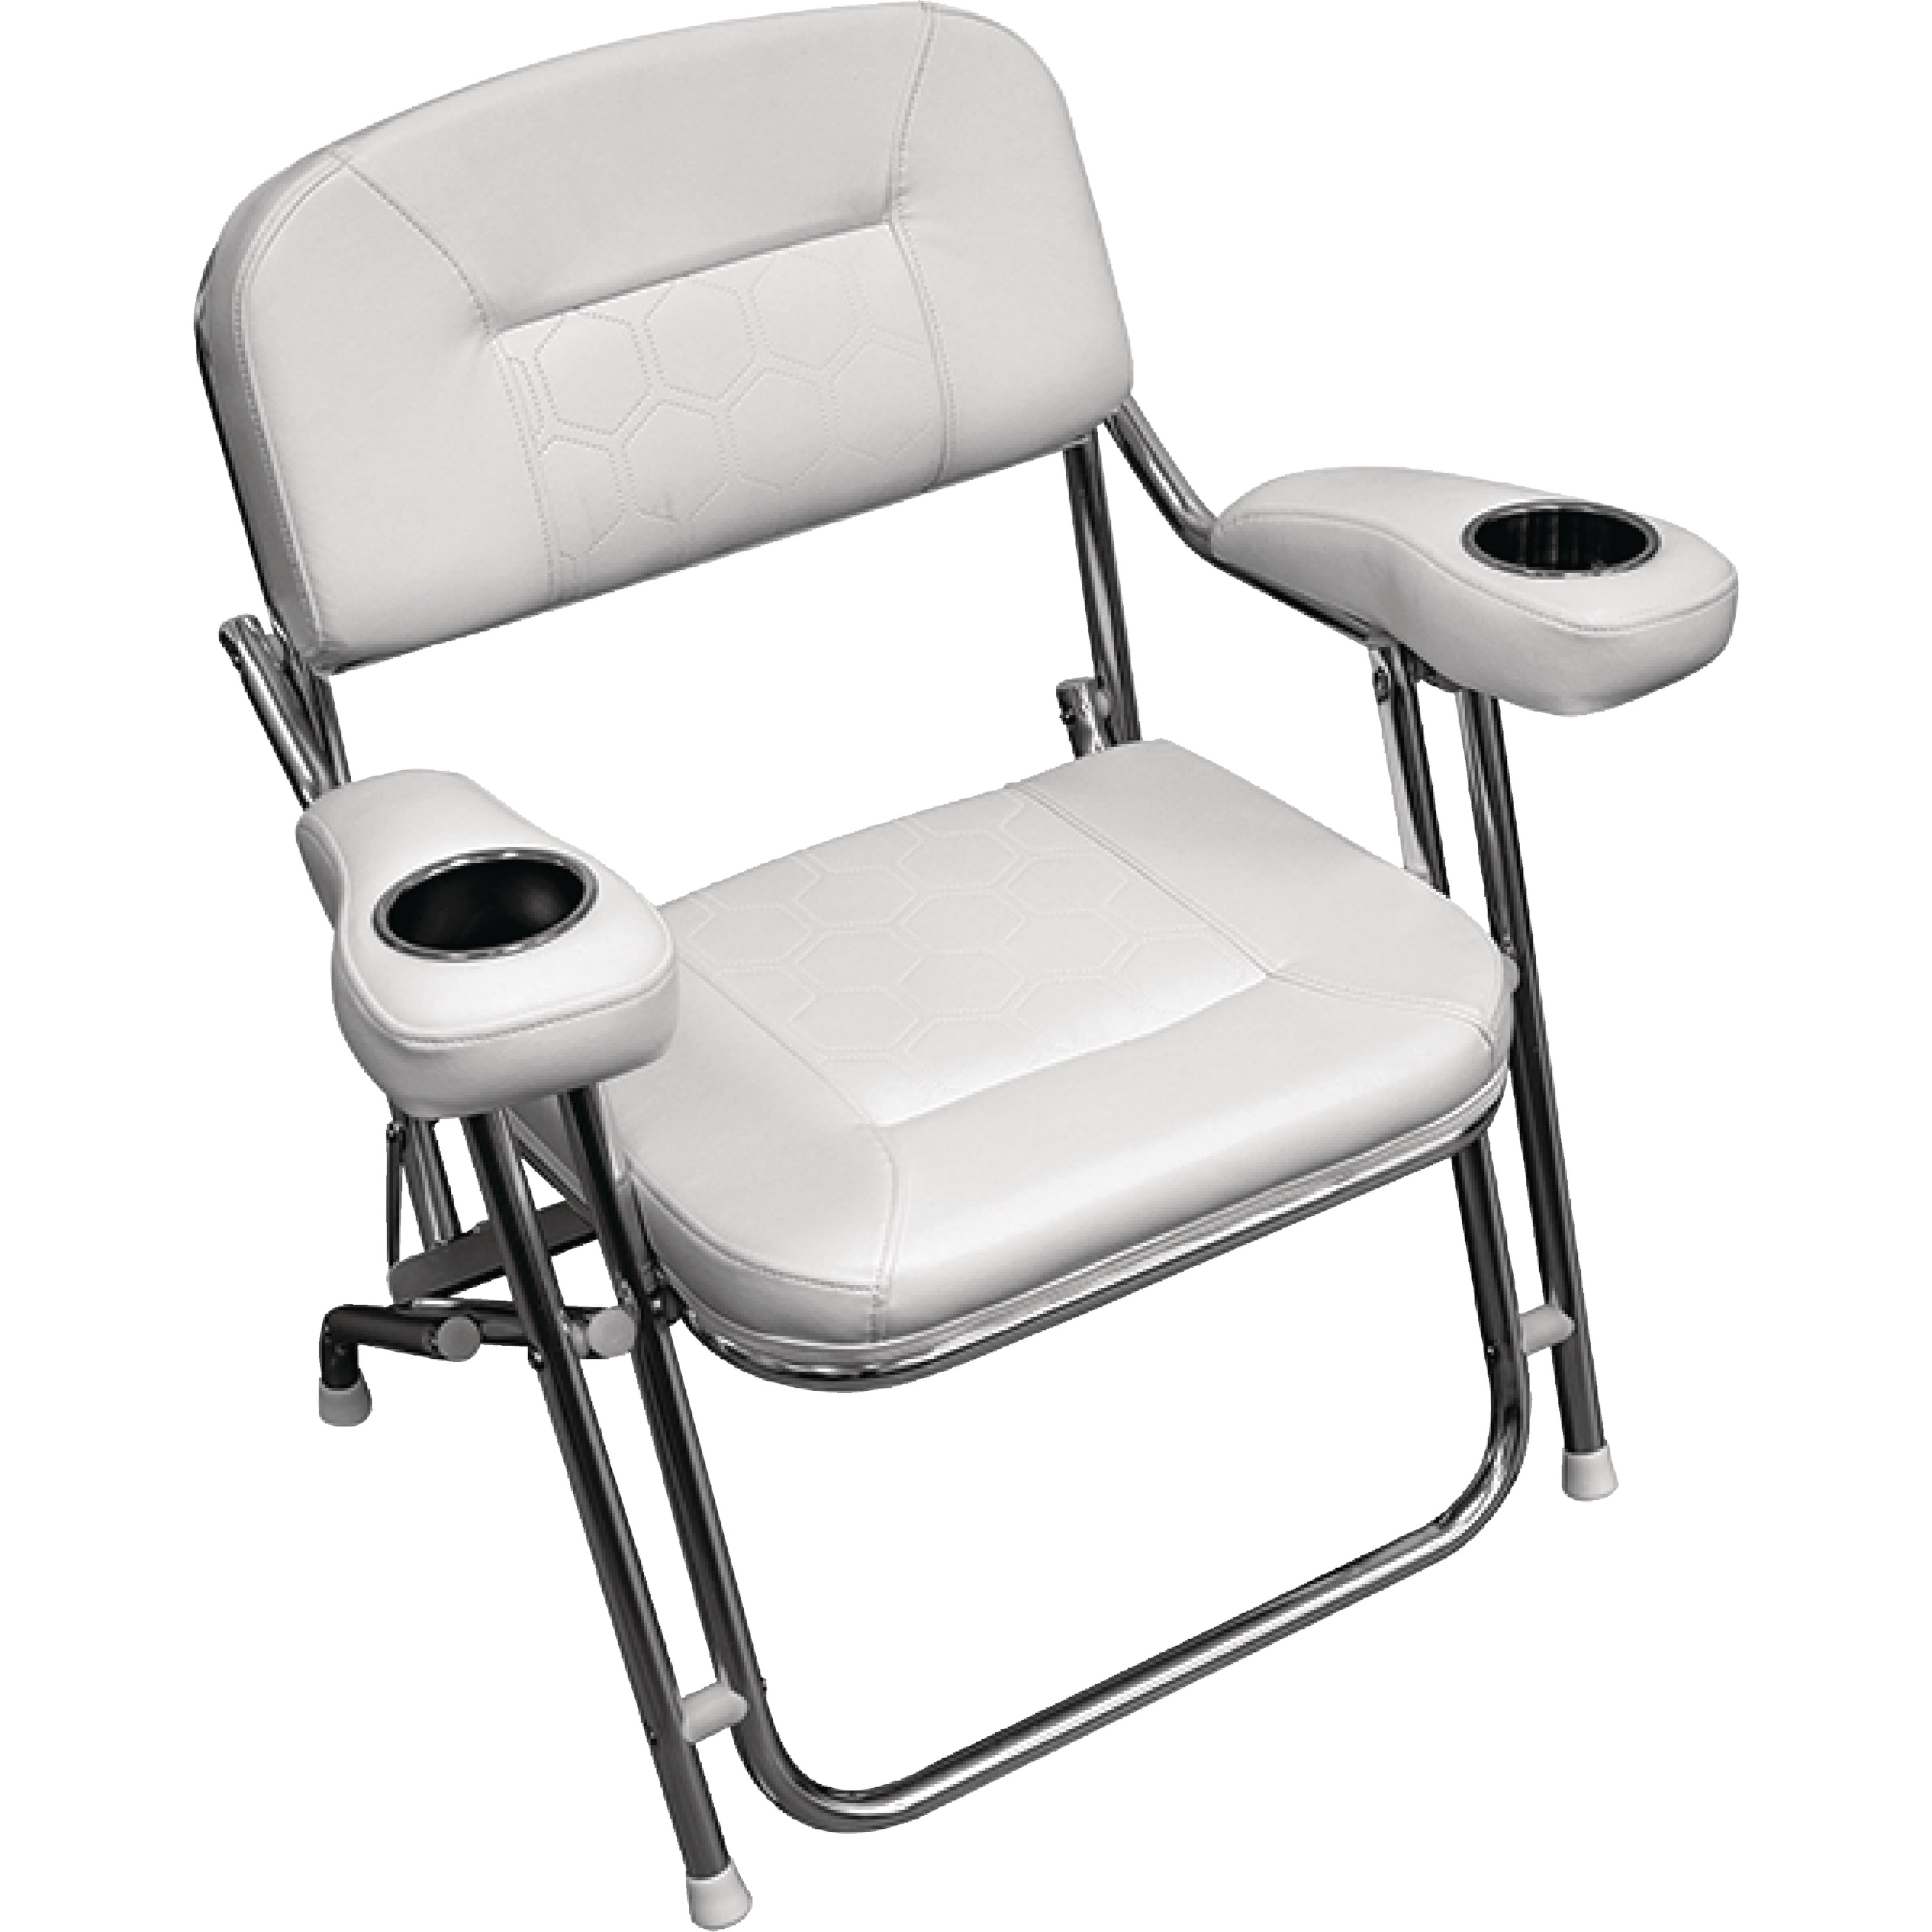 yacht chair manufacturers